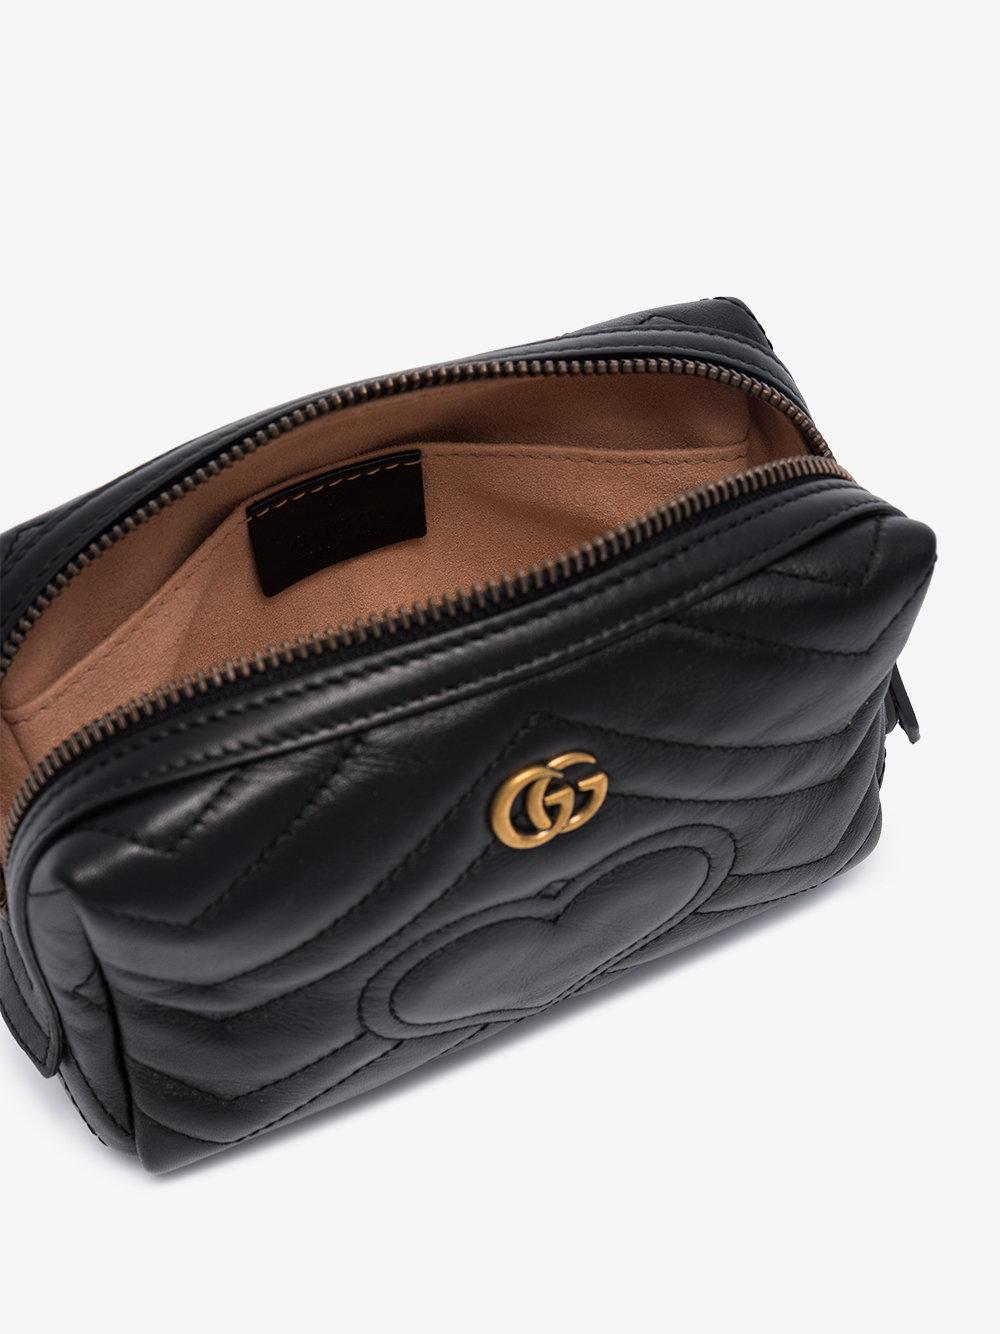 Gucci Leather Gg Marmont Cosmetic Case in Black - Lyst